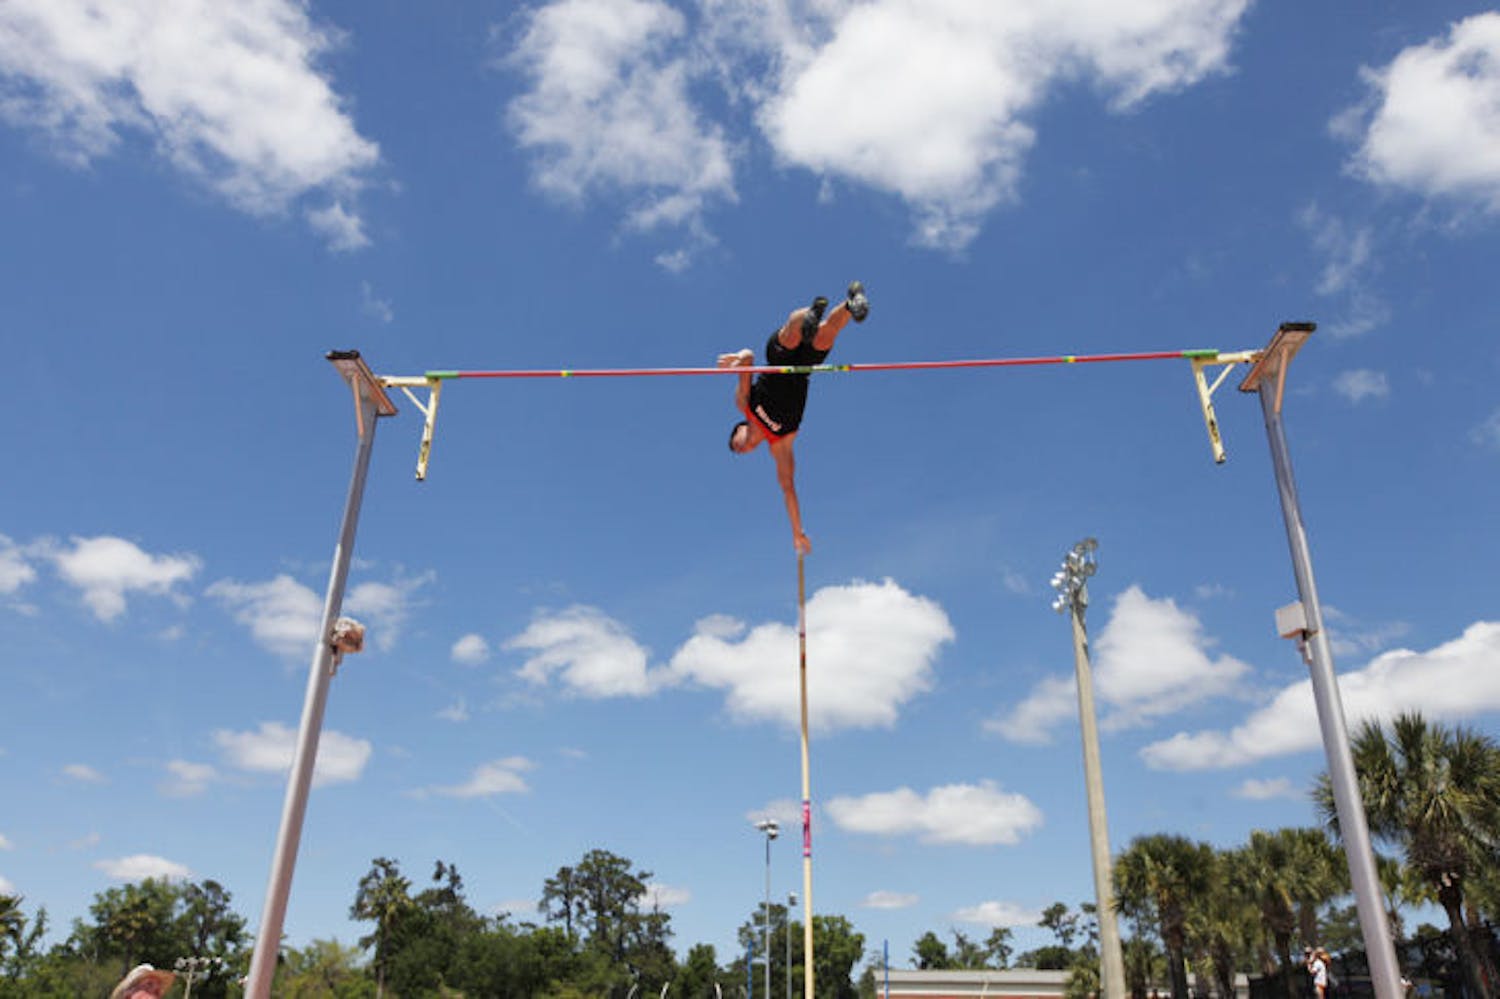 Senior Max Lang attempts to clear the pole during the Florida Relays on Saturday at Percy Beard Track at James G. Pressly Stadium. Lang tied for 20th in the men’s university division.